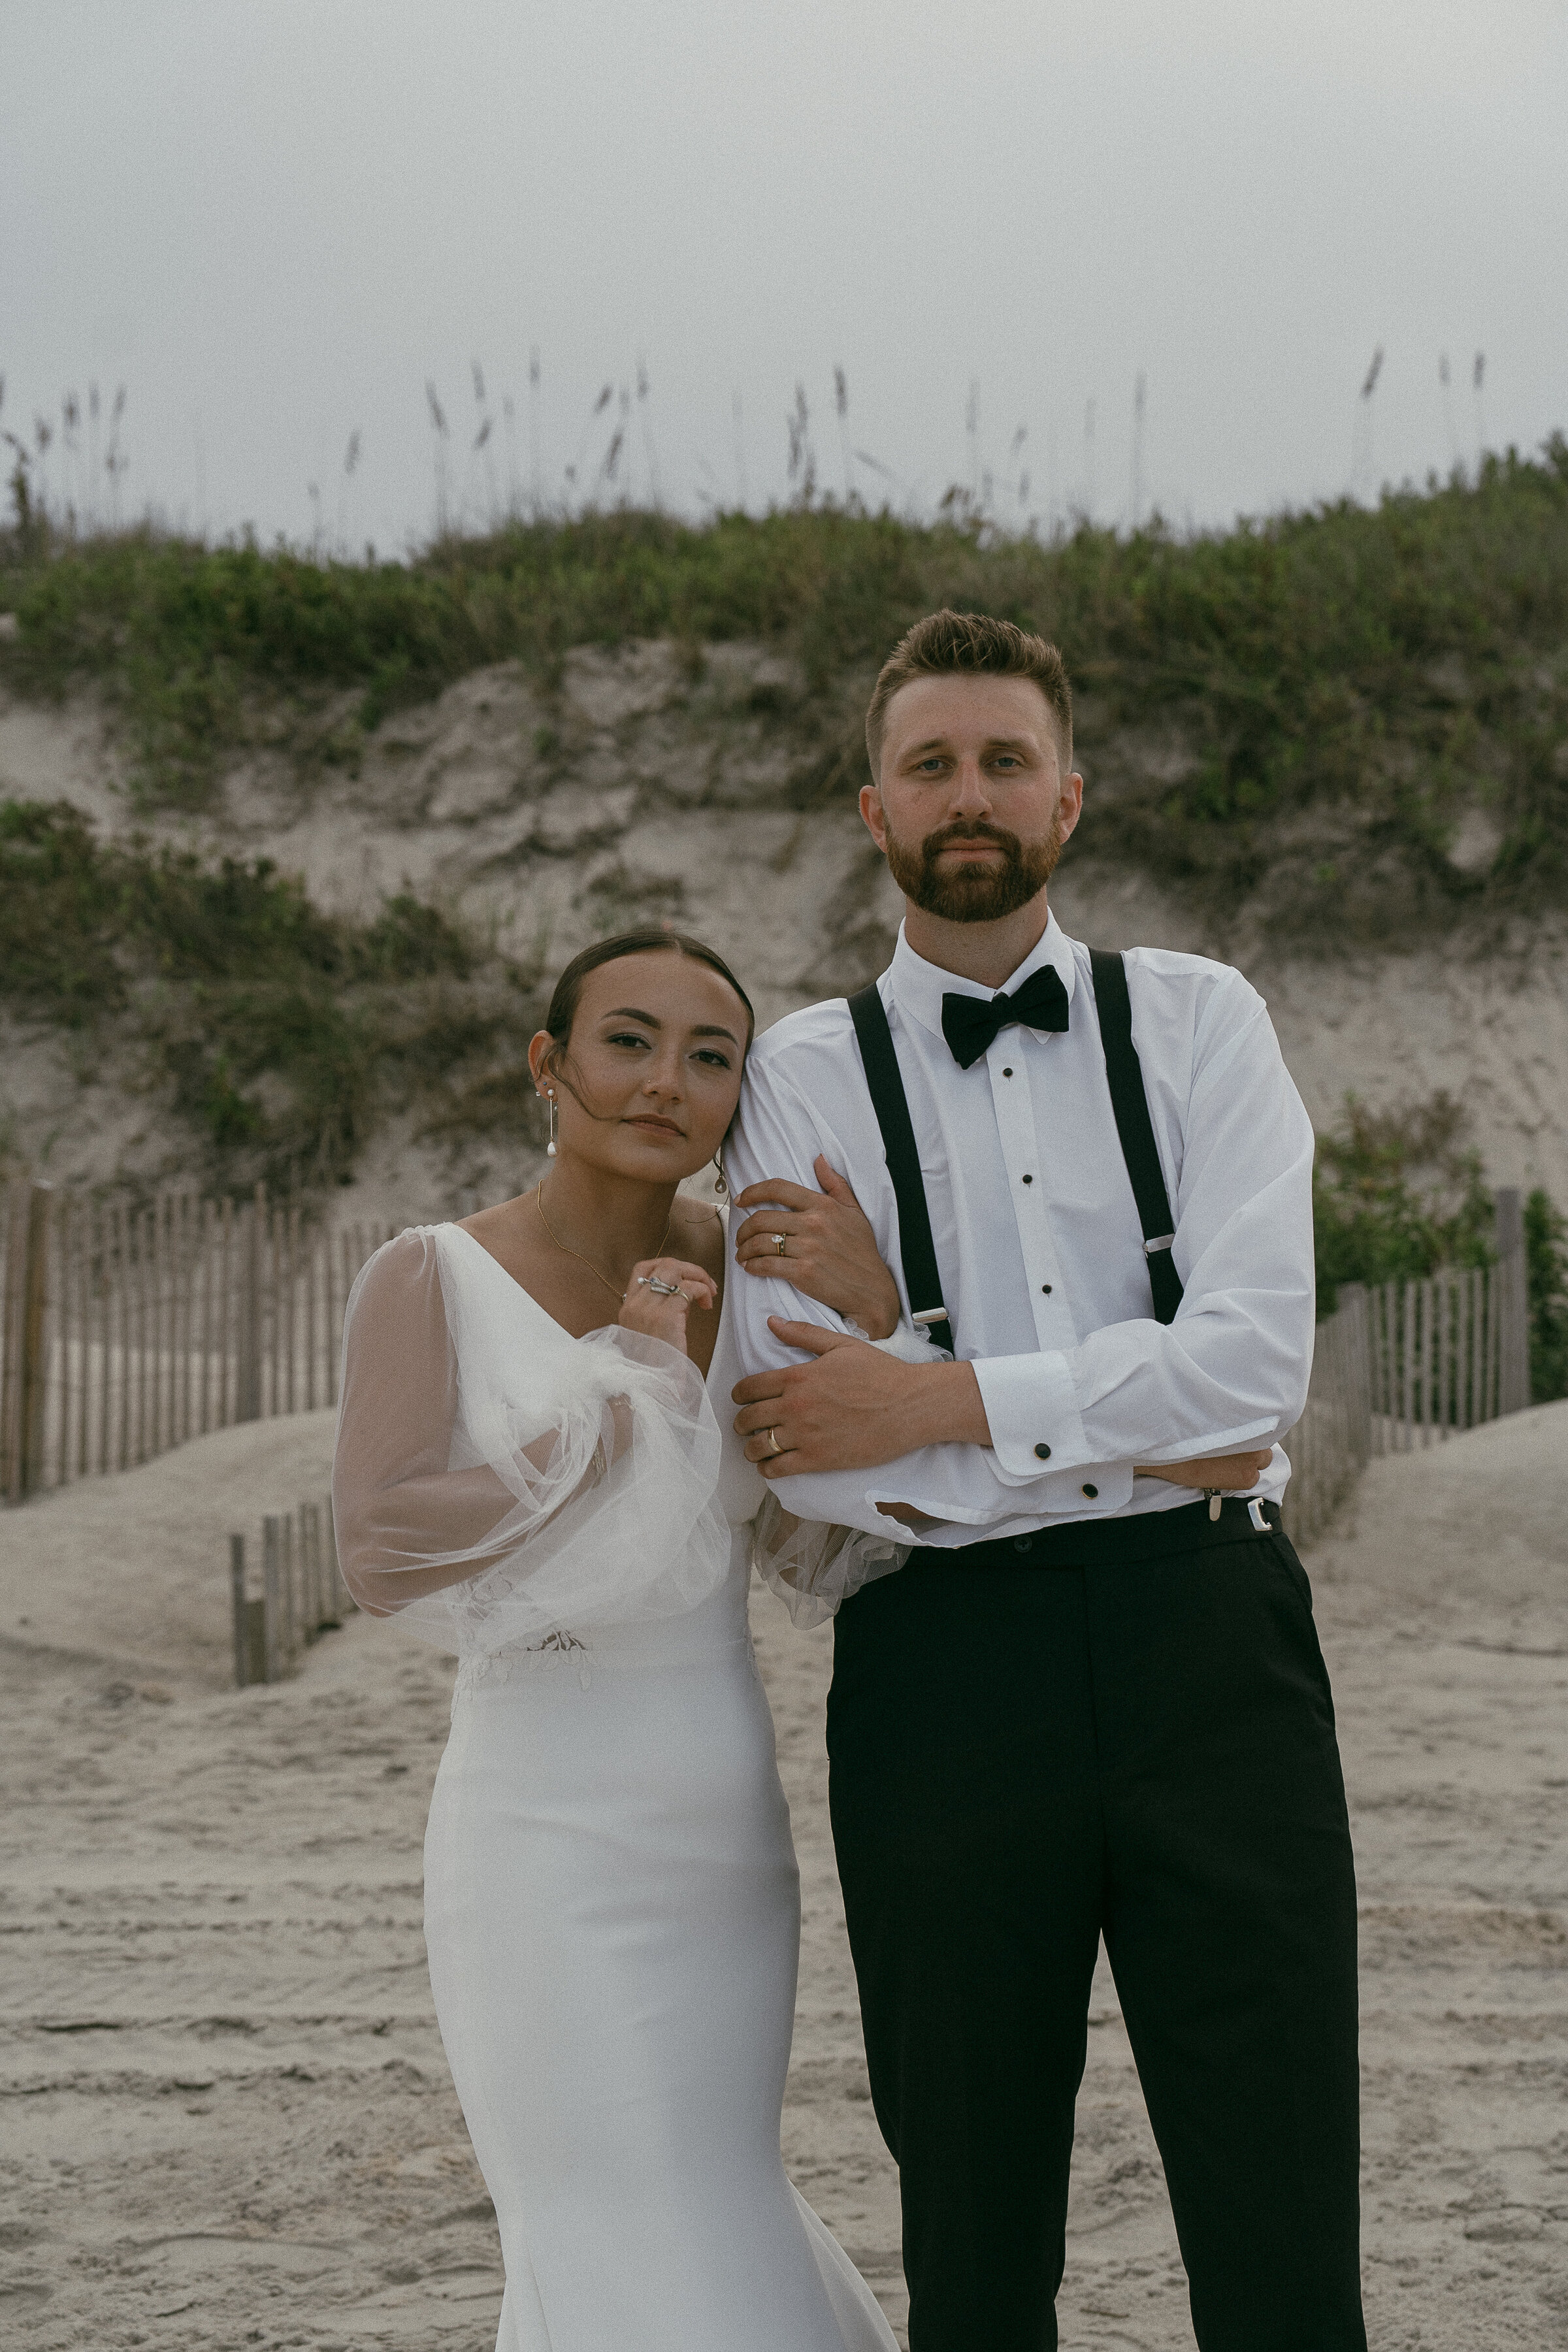 Bride and groom standing on the beach with serious expressions.